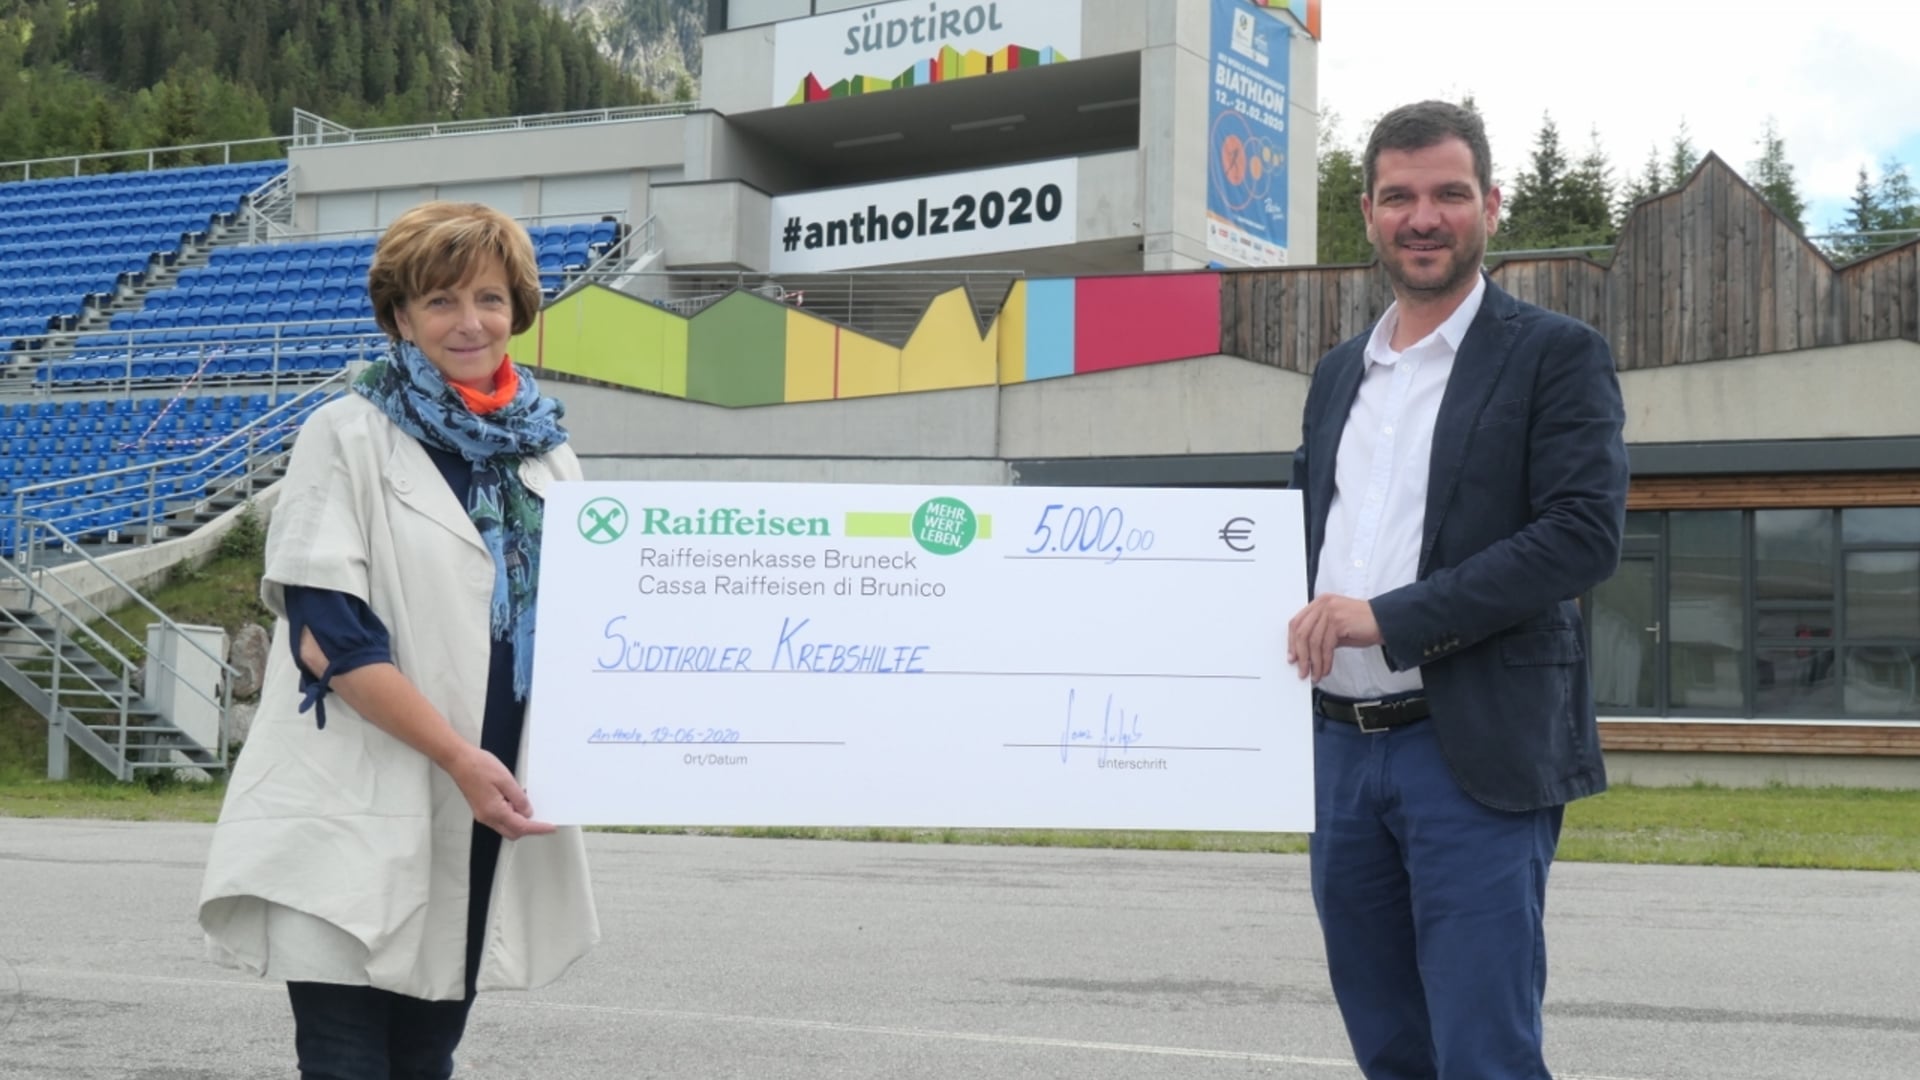 19.06.2020 - The Biathlon World Championship Antholz supports South Tyrolean cancer aid